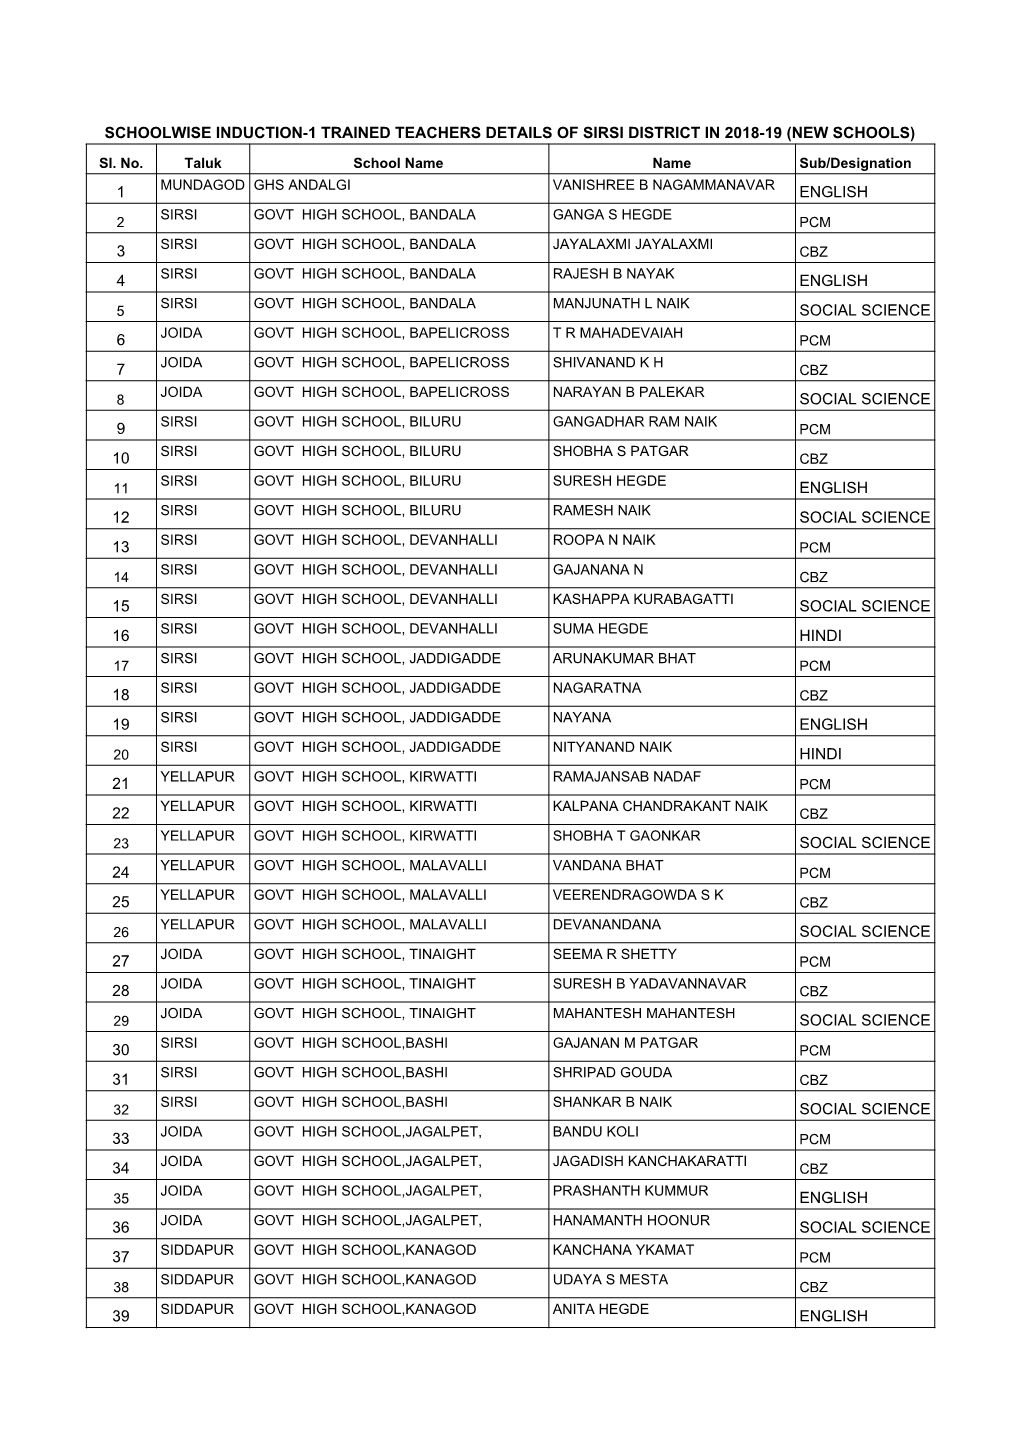 List of Trained Teachers Induction-1 Sirsi